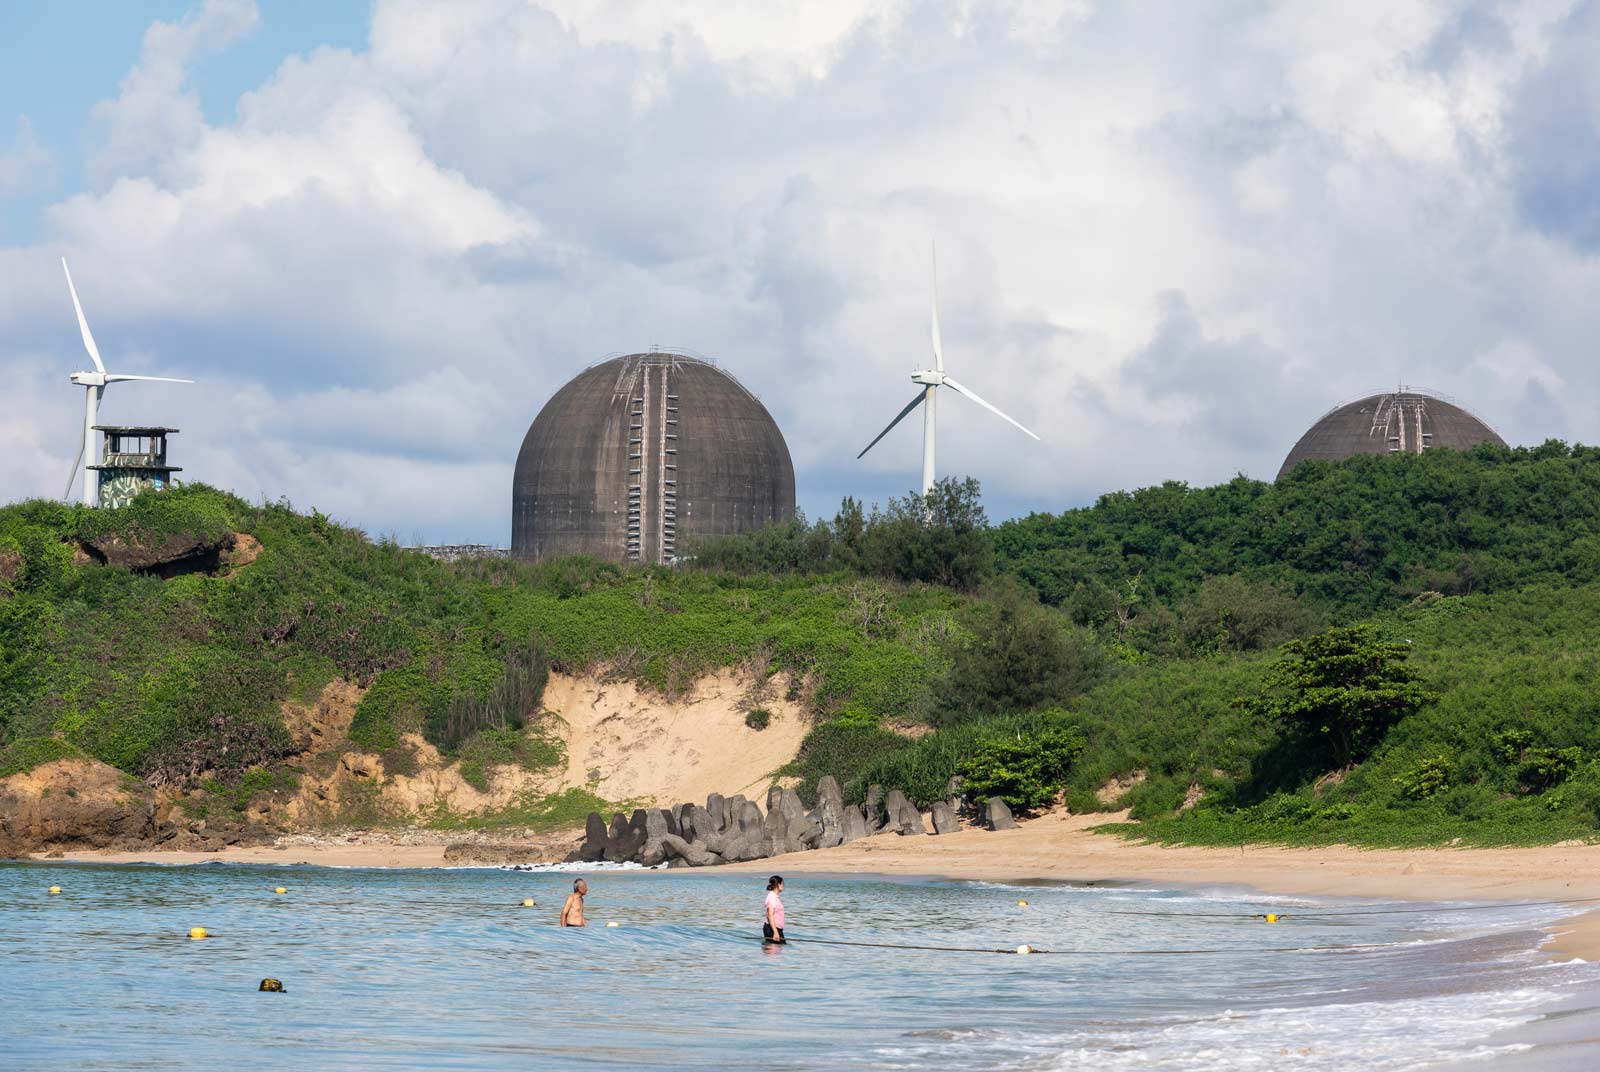 #DearGreenpeace: Nuclear energy can play a role in Taiwan’s decarbonization